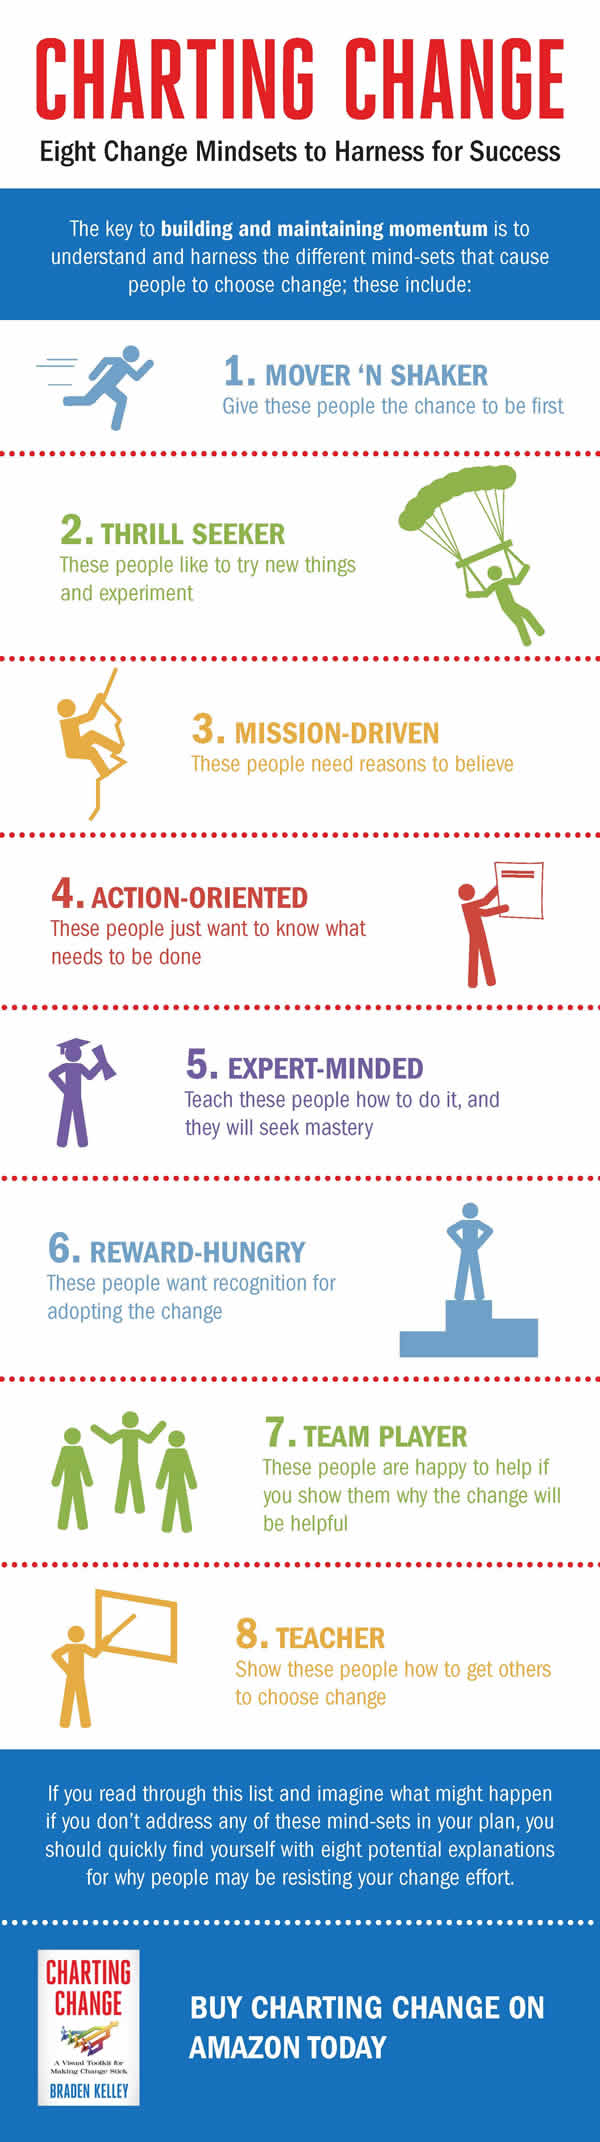 Eight Change Mindsets to Harness for Success